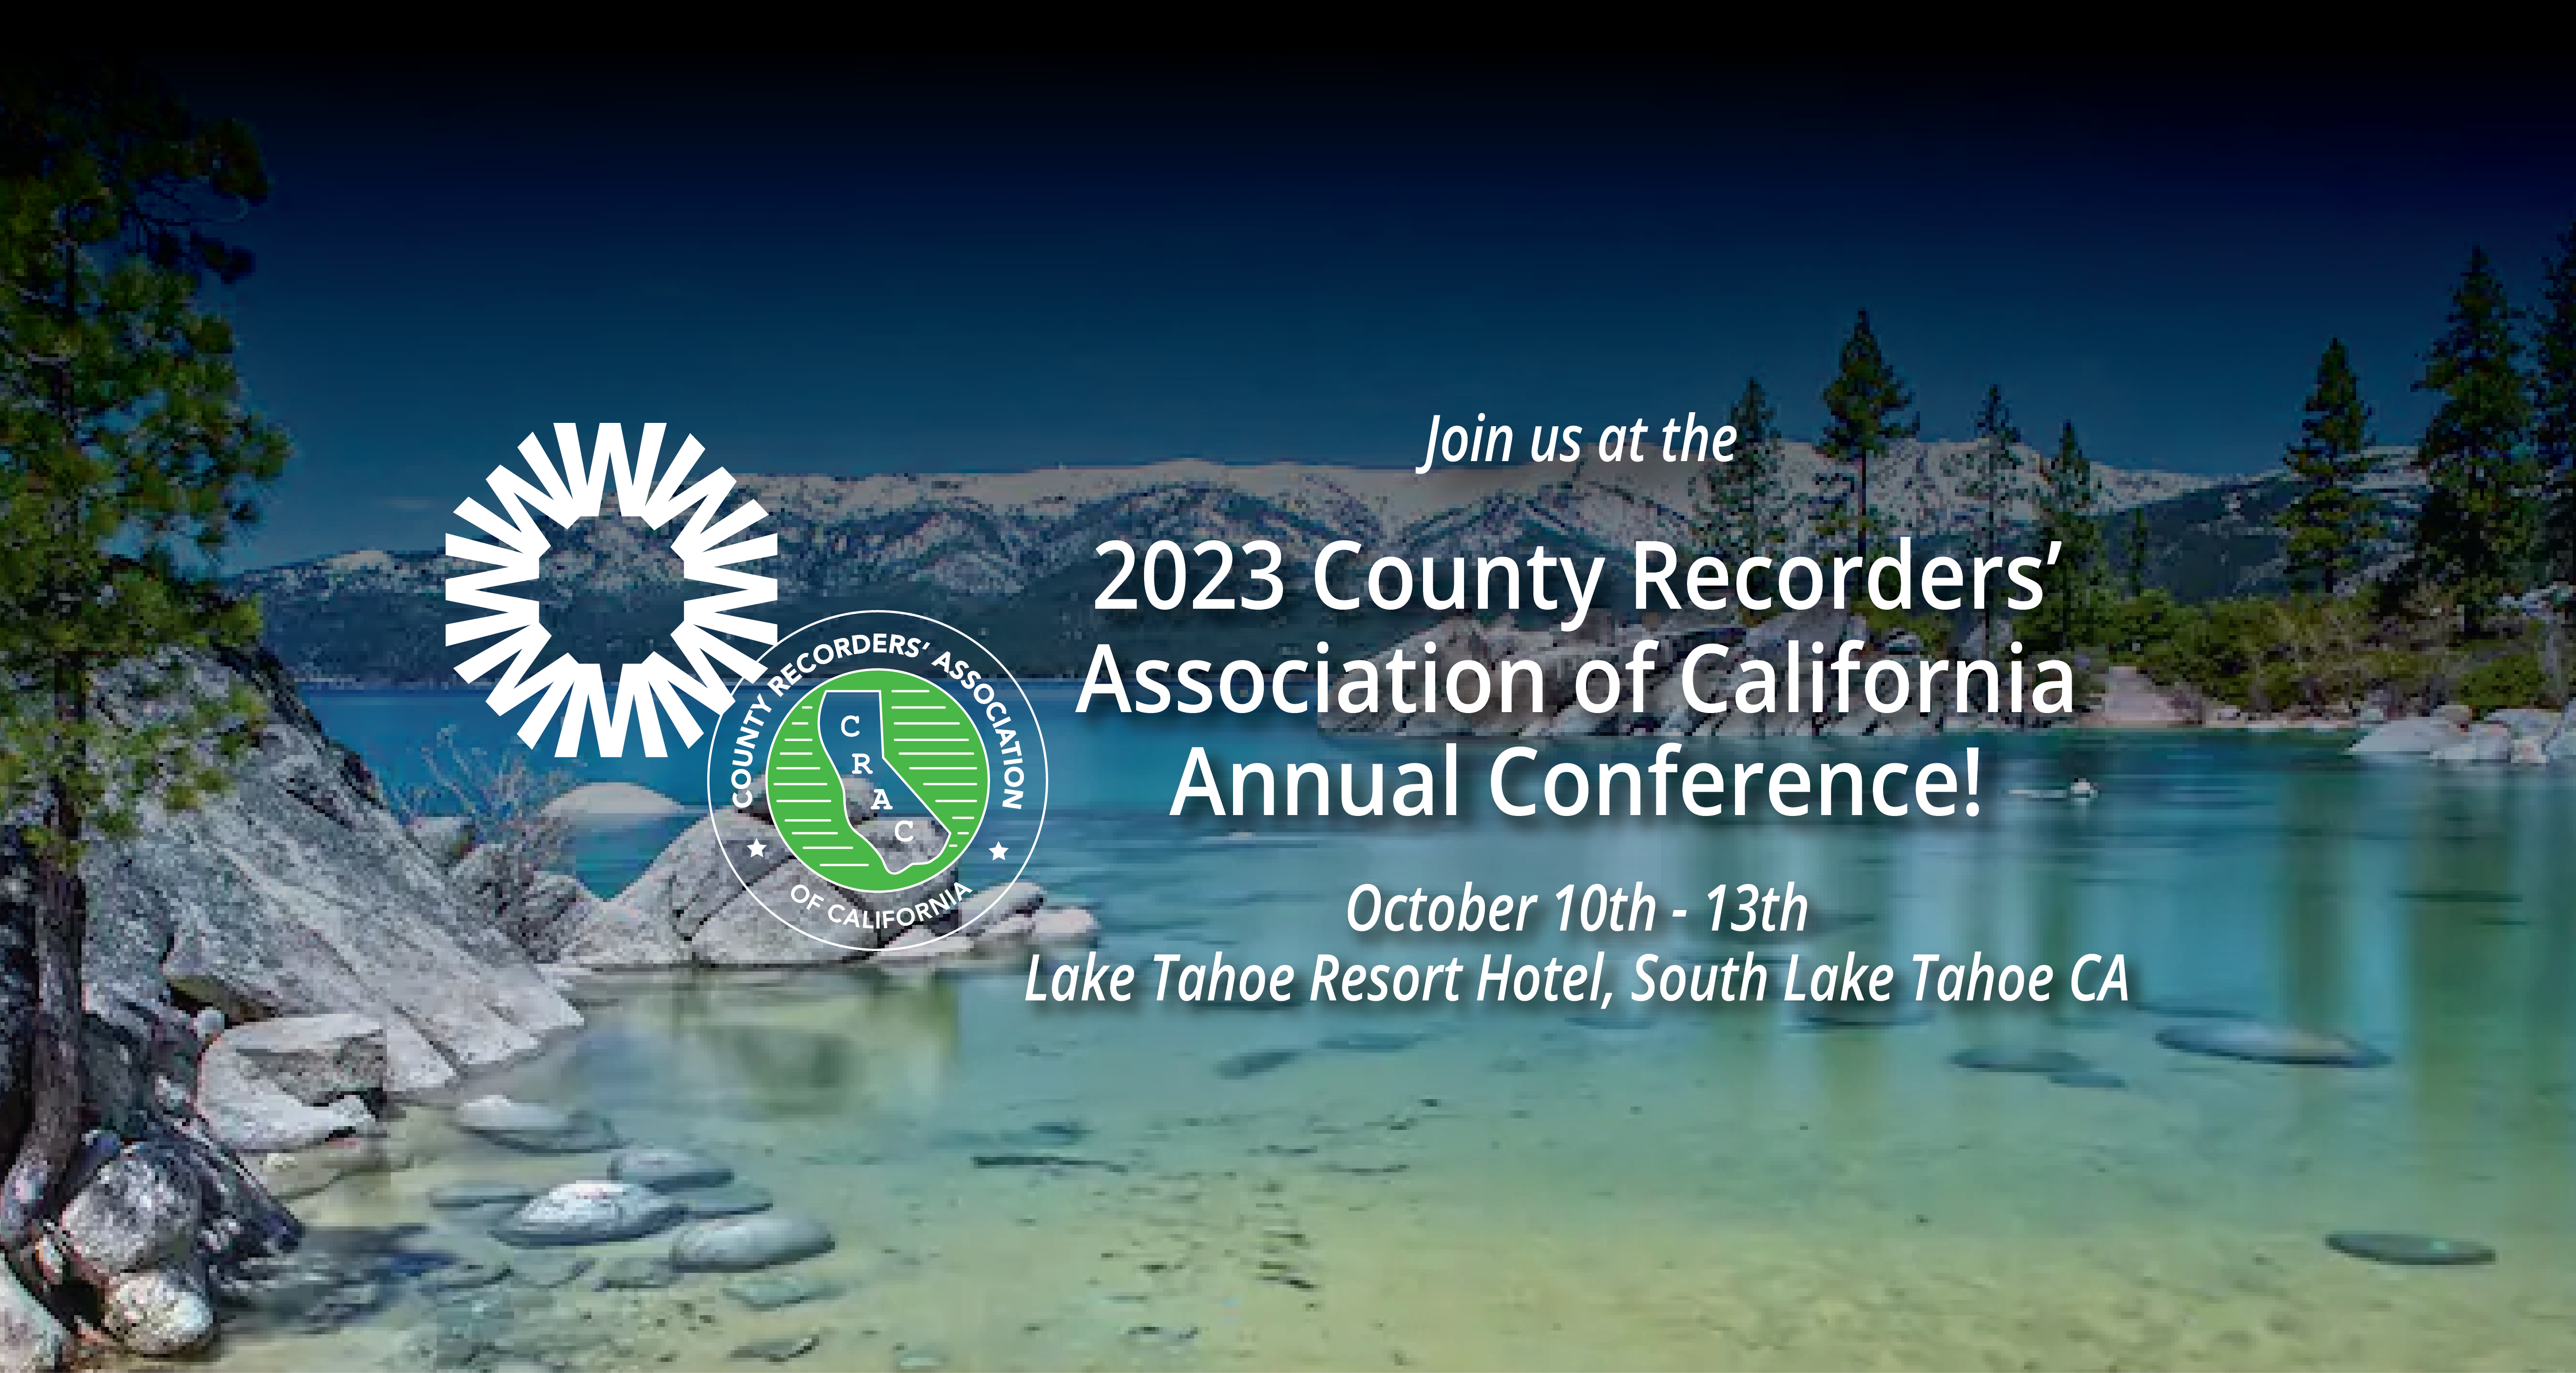 Join us for the 2023 CRAC Conference (County Recorders' Association of California). October 10th-13th at the Lake Tahoe Resort Hotel in South Lake Tahoe, CA written with the background being a picture of Lake Tahoe with snow covered mountains above clear water